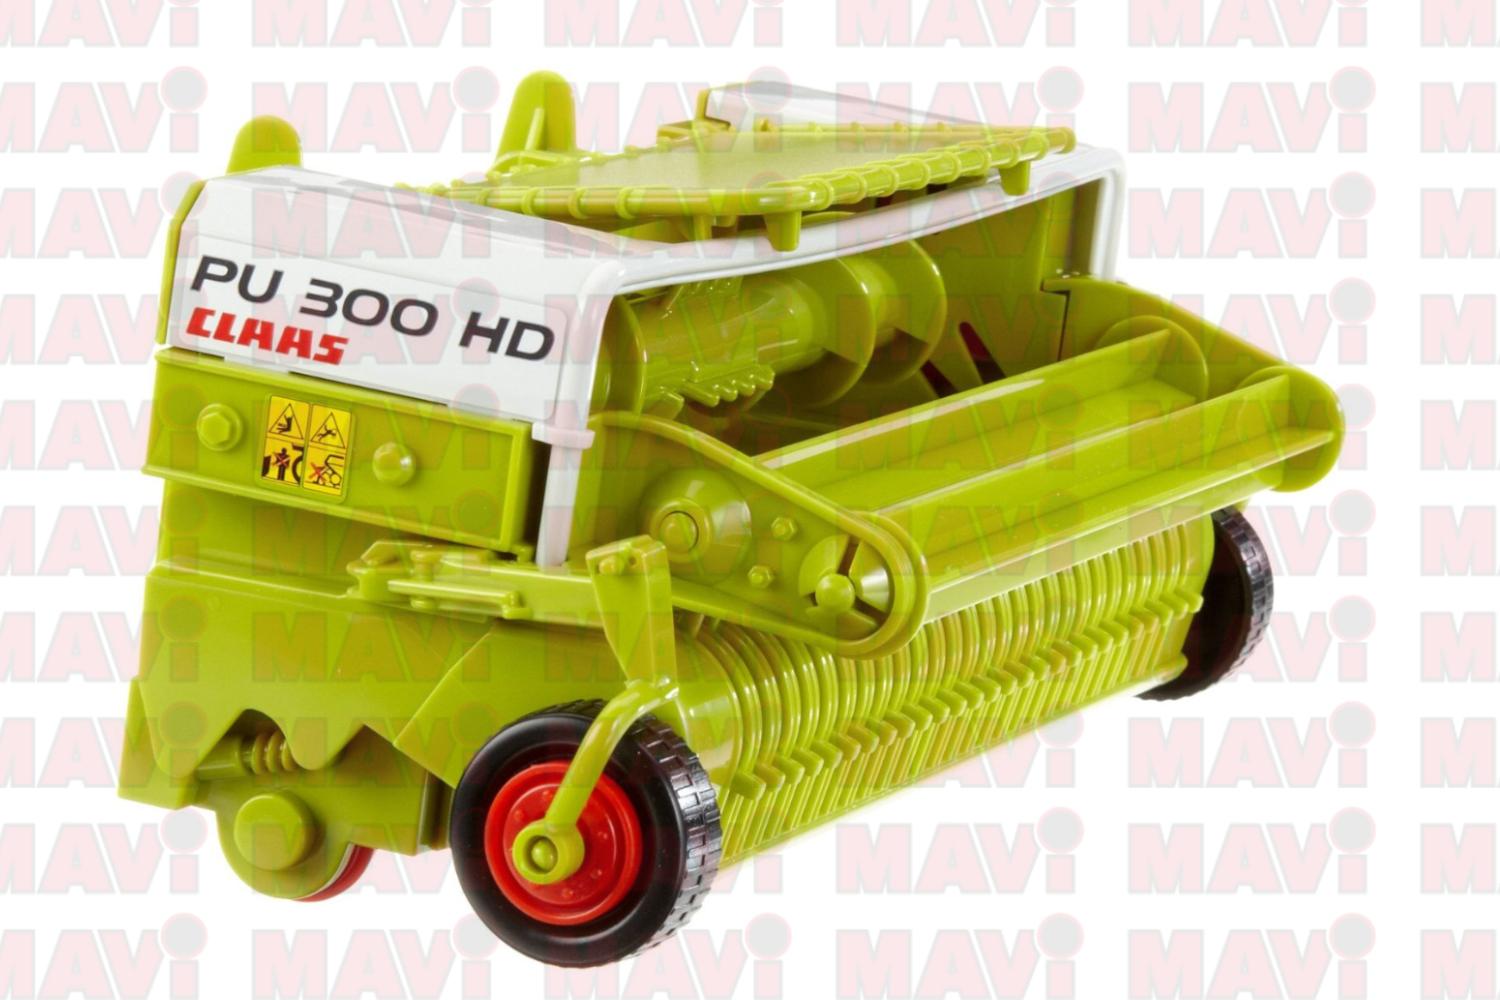 TOCATOR CAMP CLAAS PICK UP 300HD BRUDER # 02325